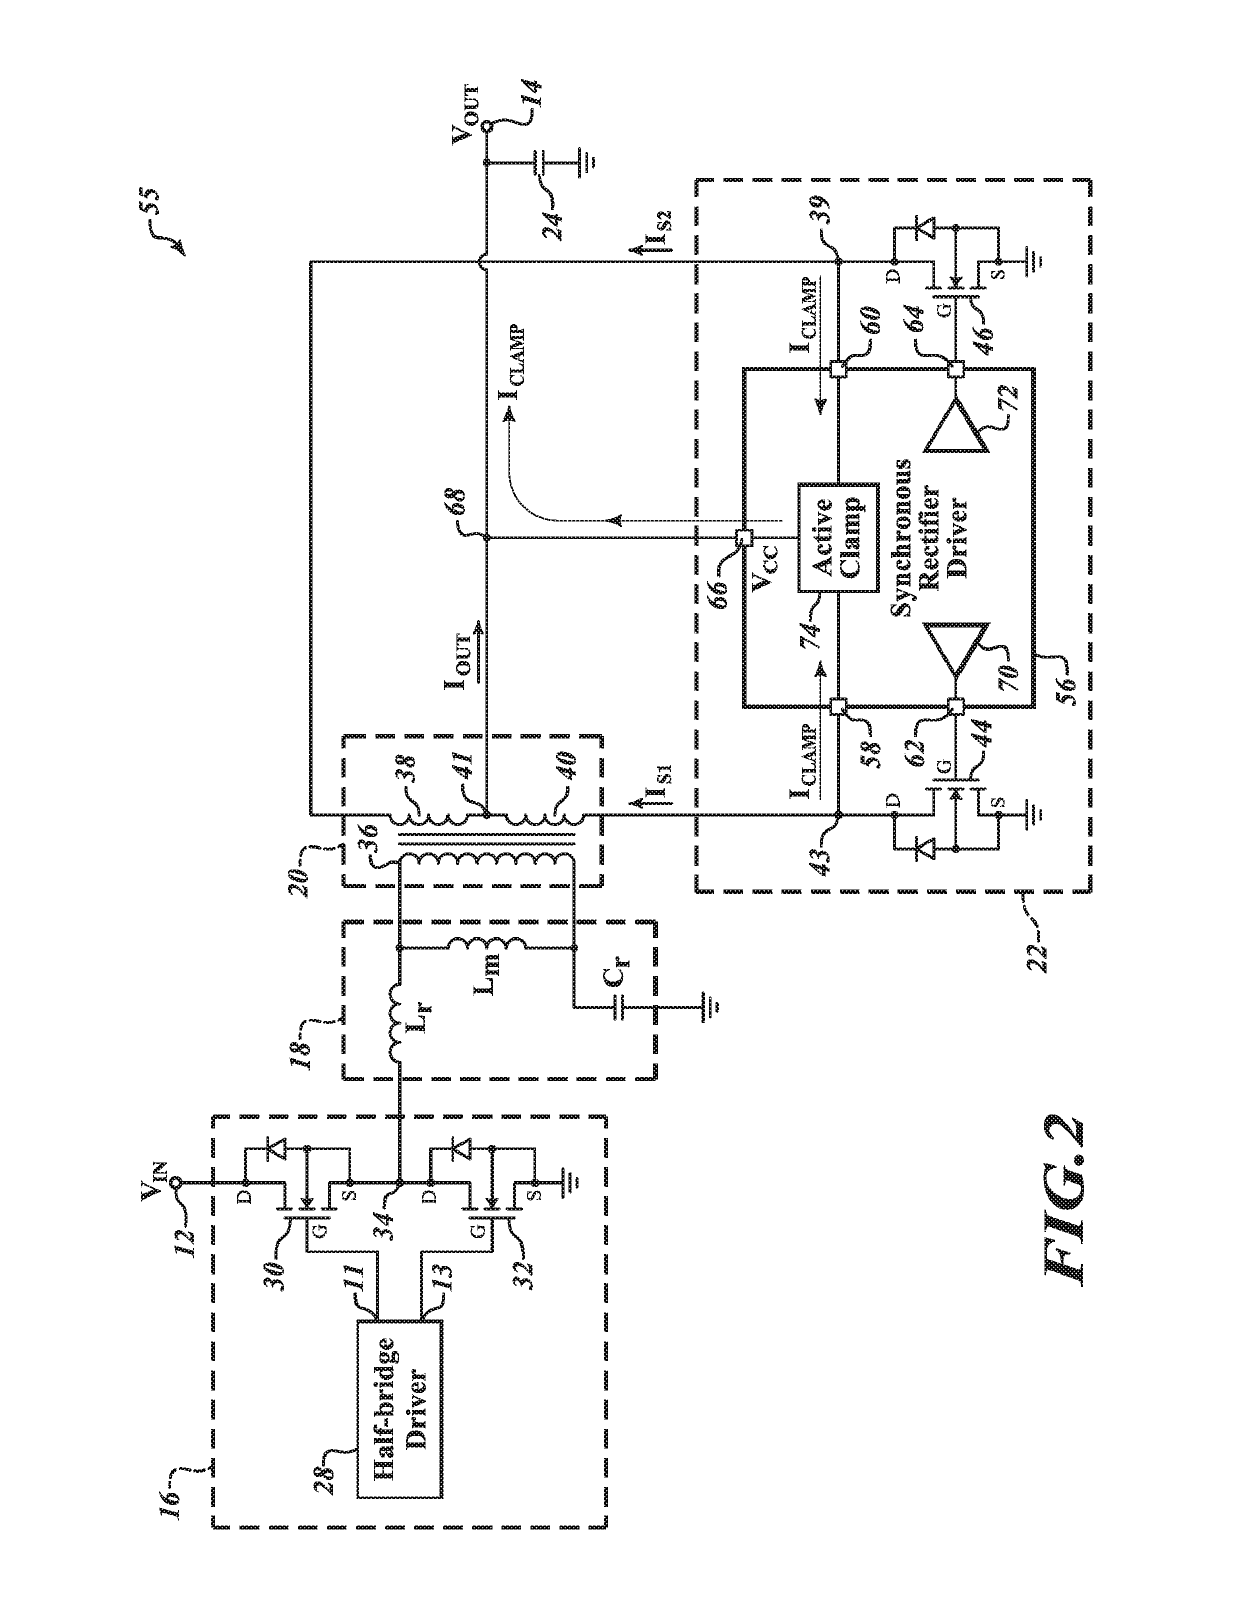 Synchronous rectifier gate driver with active clamp